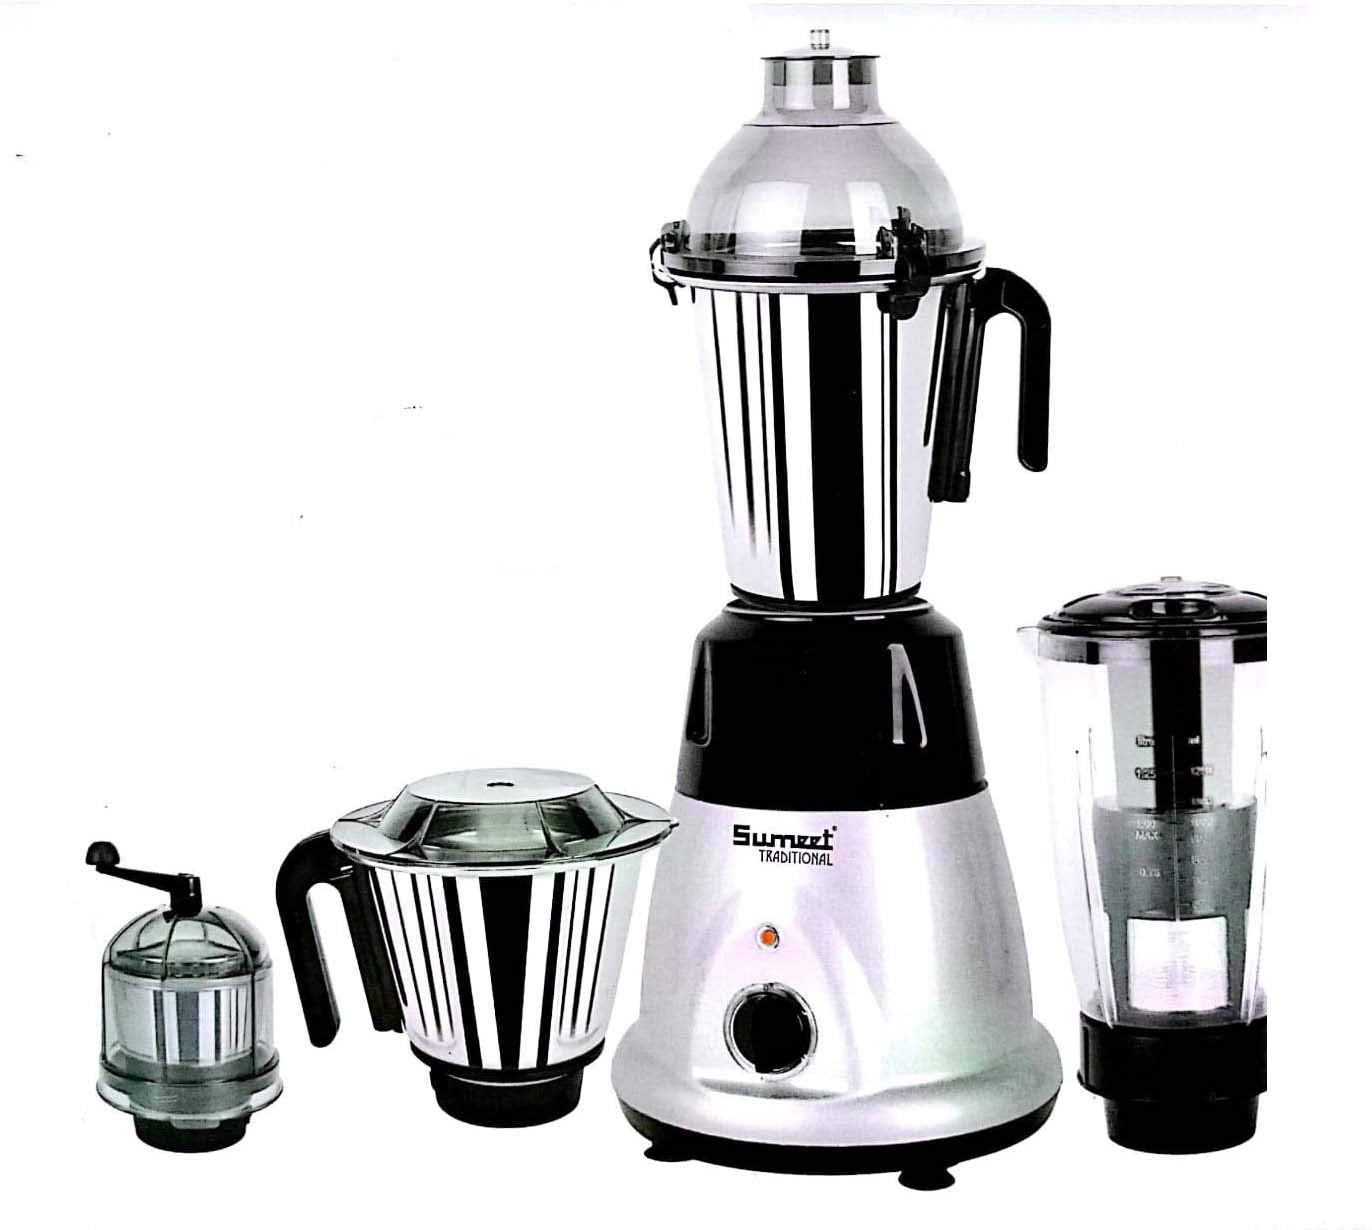 Sumeet Traditional Domestic Plus 2018 750W Mixer Grinder with 4 Jars, White